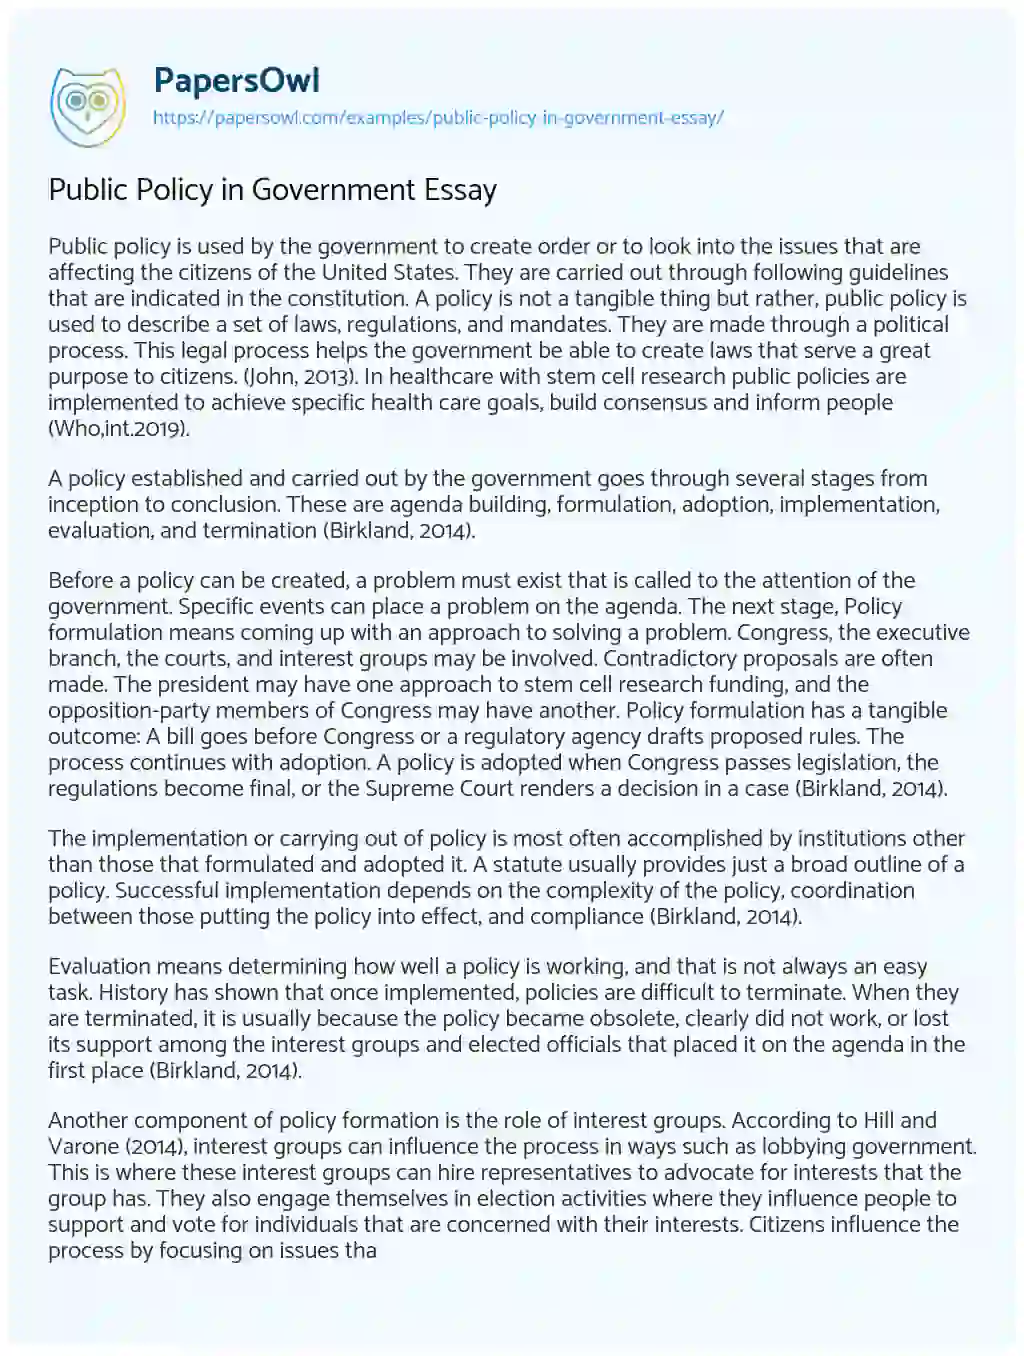 Essay on Public Policy in Government Essay